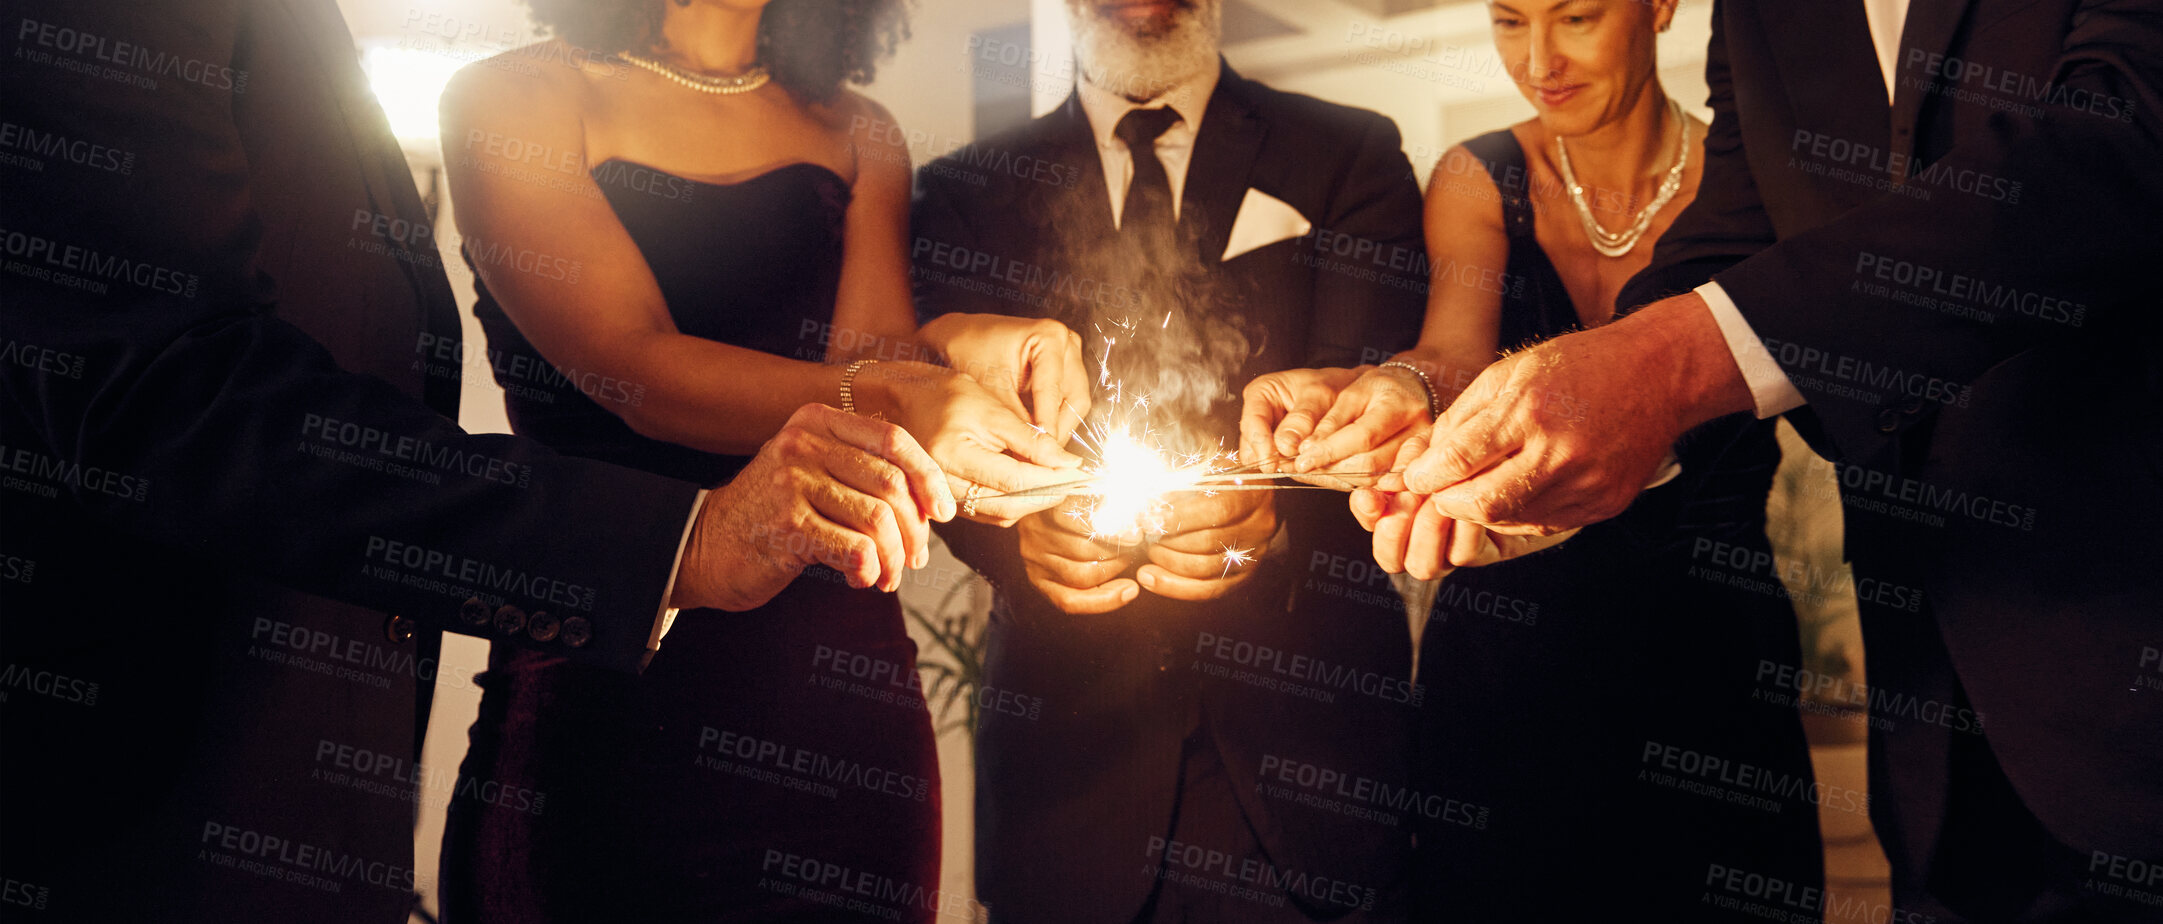 Buy stock photo Fire, sparklers and people at a luxury party, event or celebration for new year with formal outfit. Celebrate, matches and group of friends in classy clothes at a black tie gala, banquet or dinner.